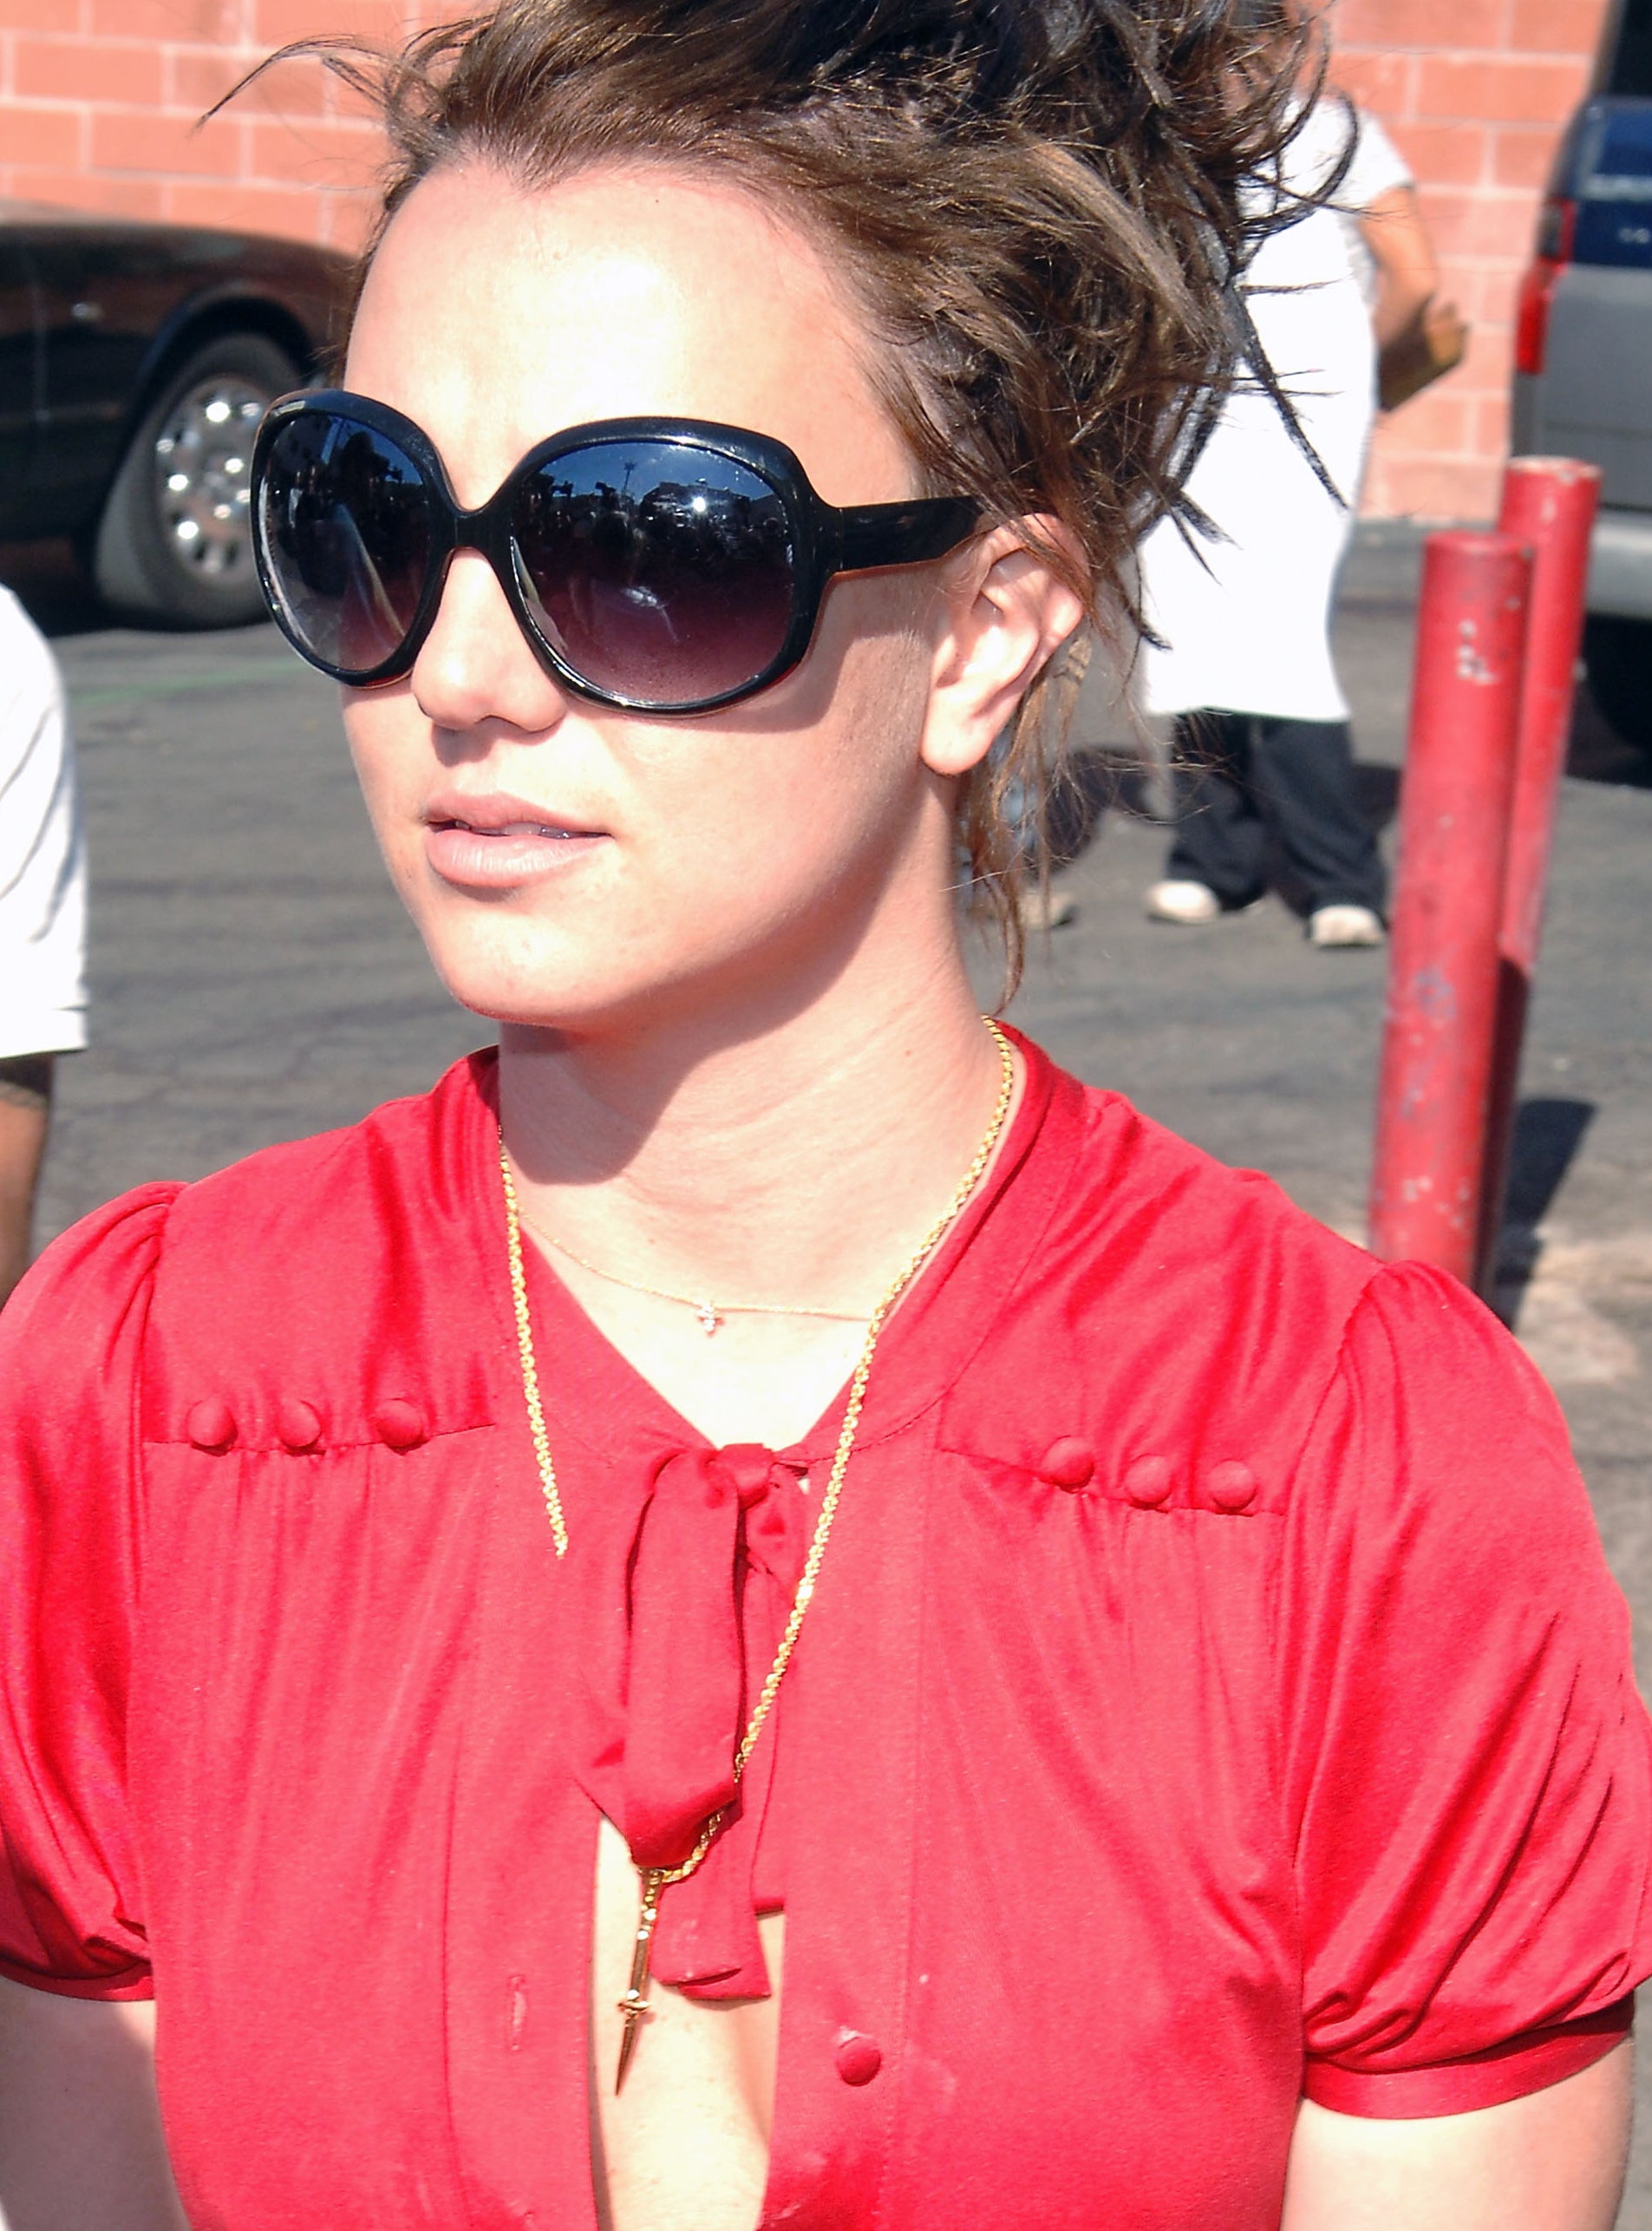 Close-up of Britney outside wearing sunglasses and her hair up